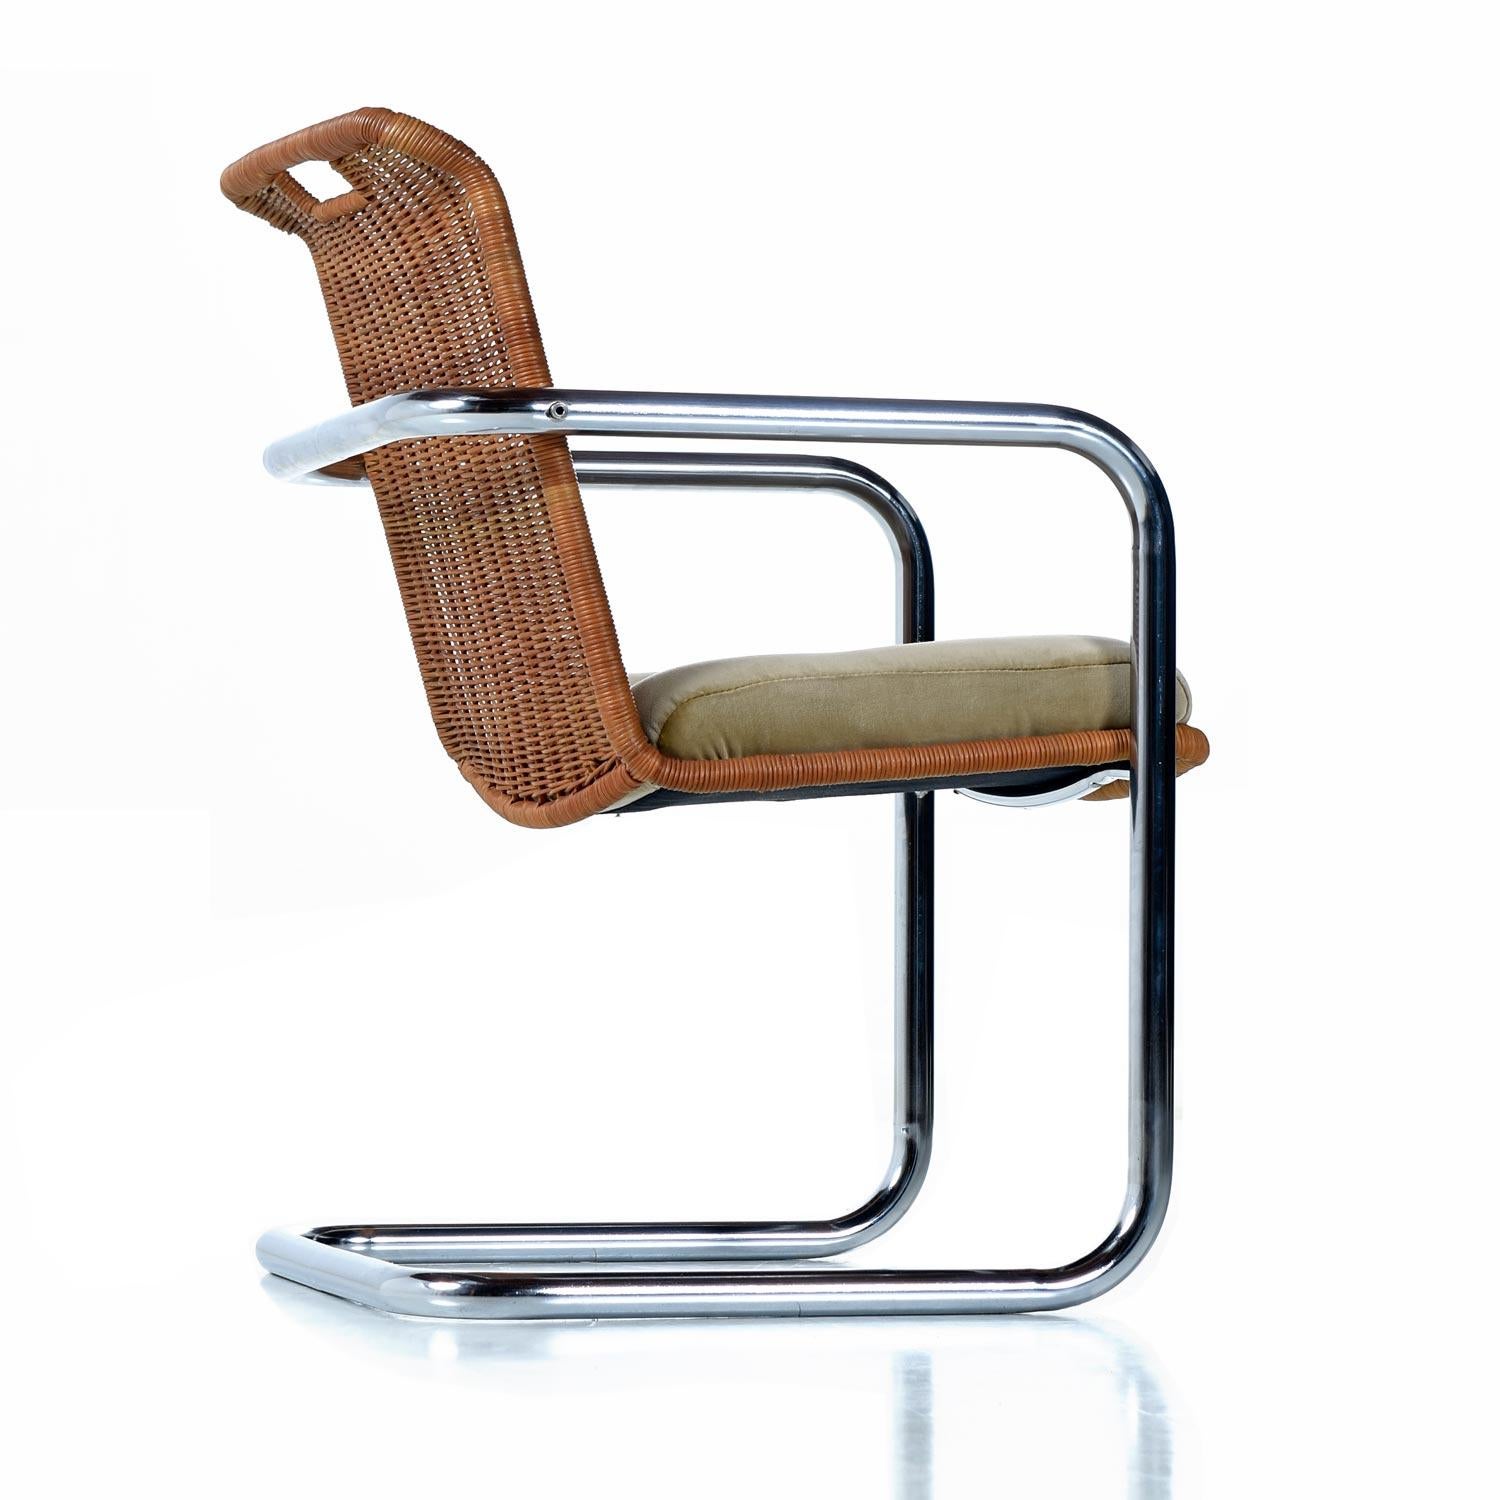 Made by Chromecraft, circa 1970s. The tubular bent chrome is the perfect complement to the tan wicker and gold velvet. These cantilever style armchairs have far more style and detail than can be appreciated in these photos. 

The restoration: Each